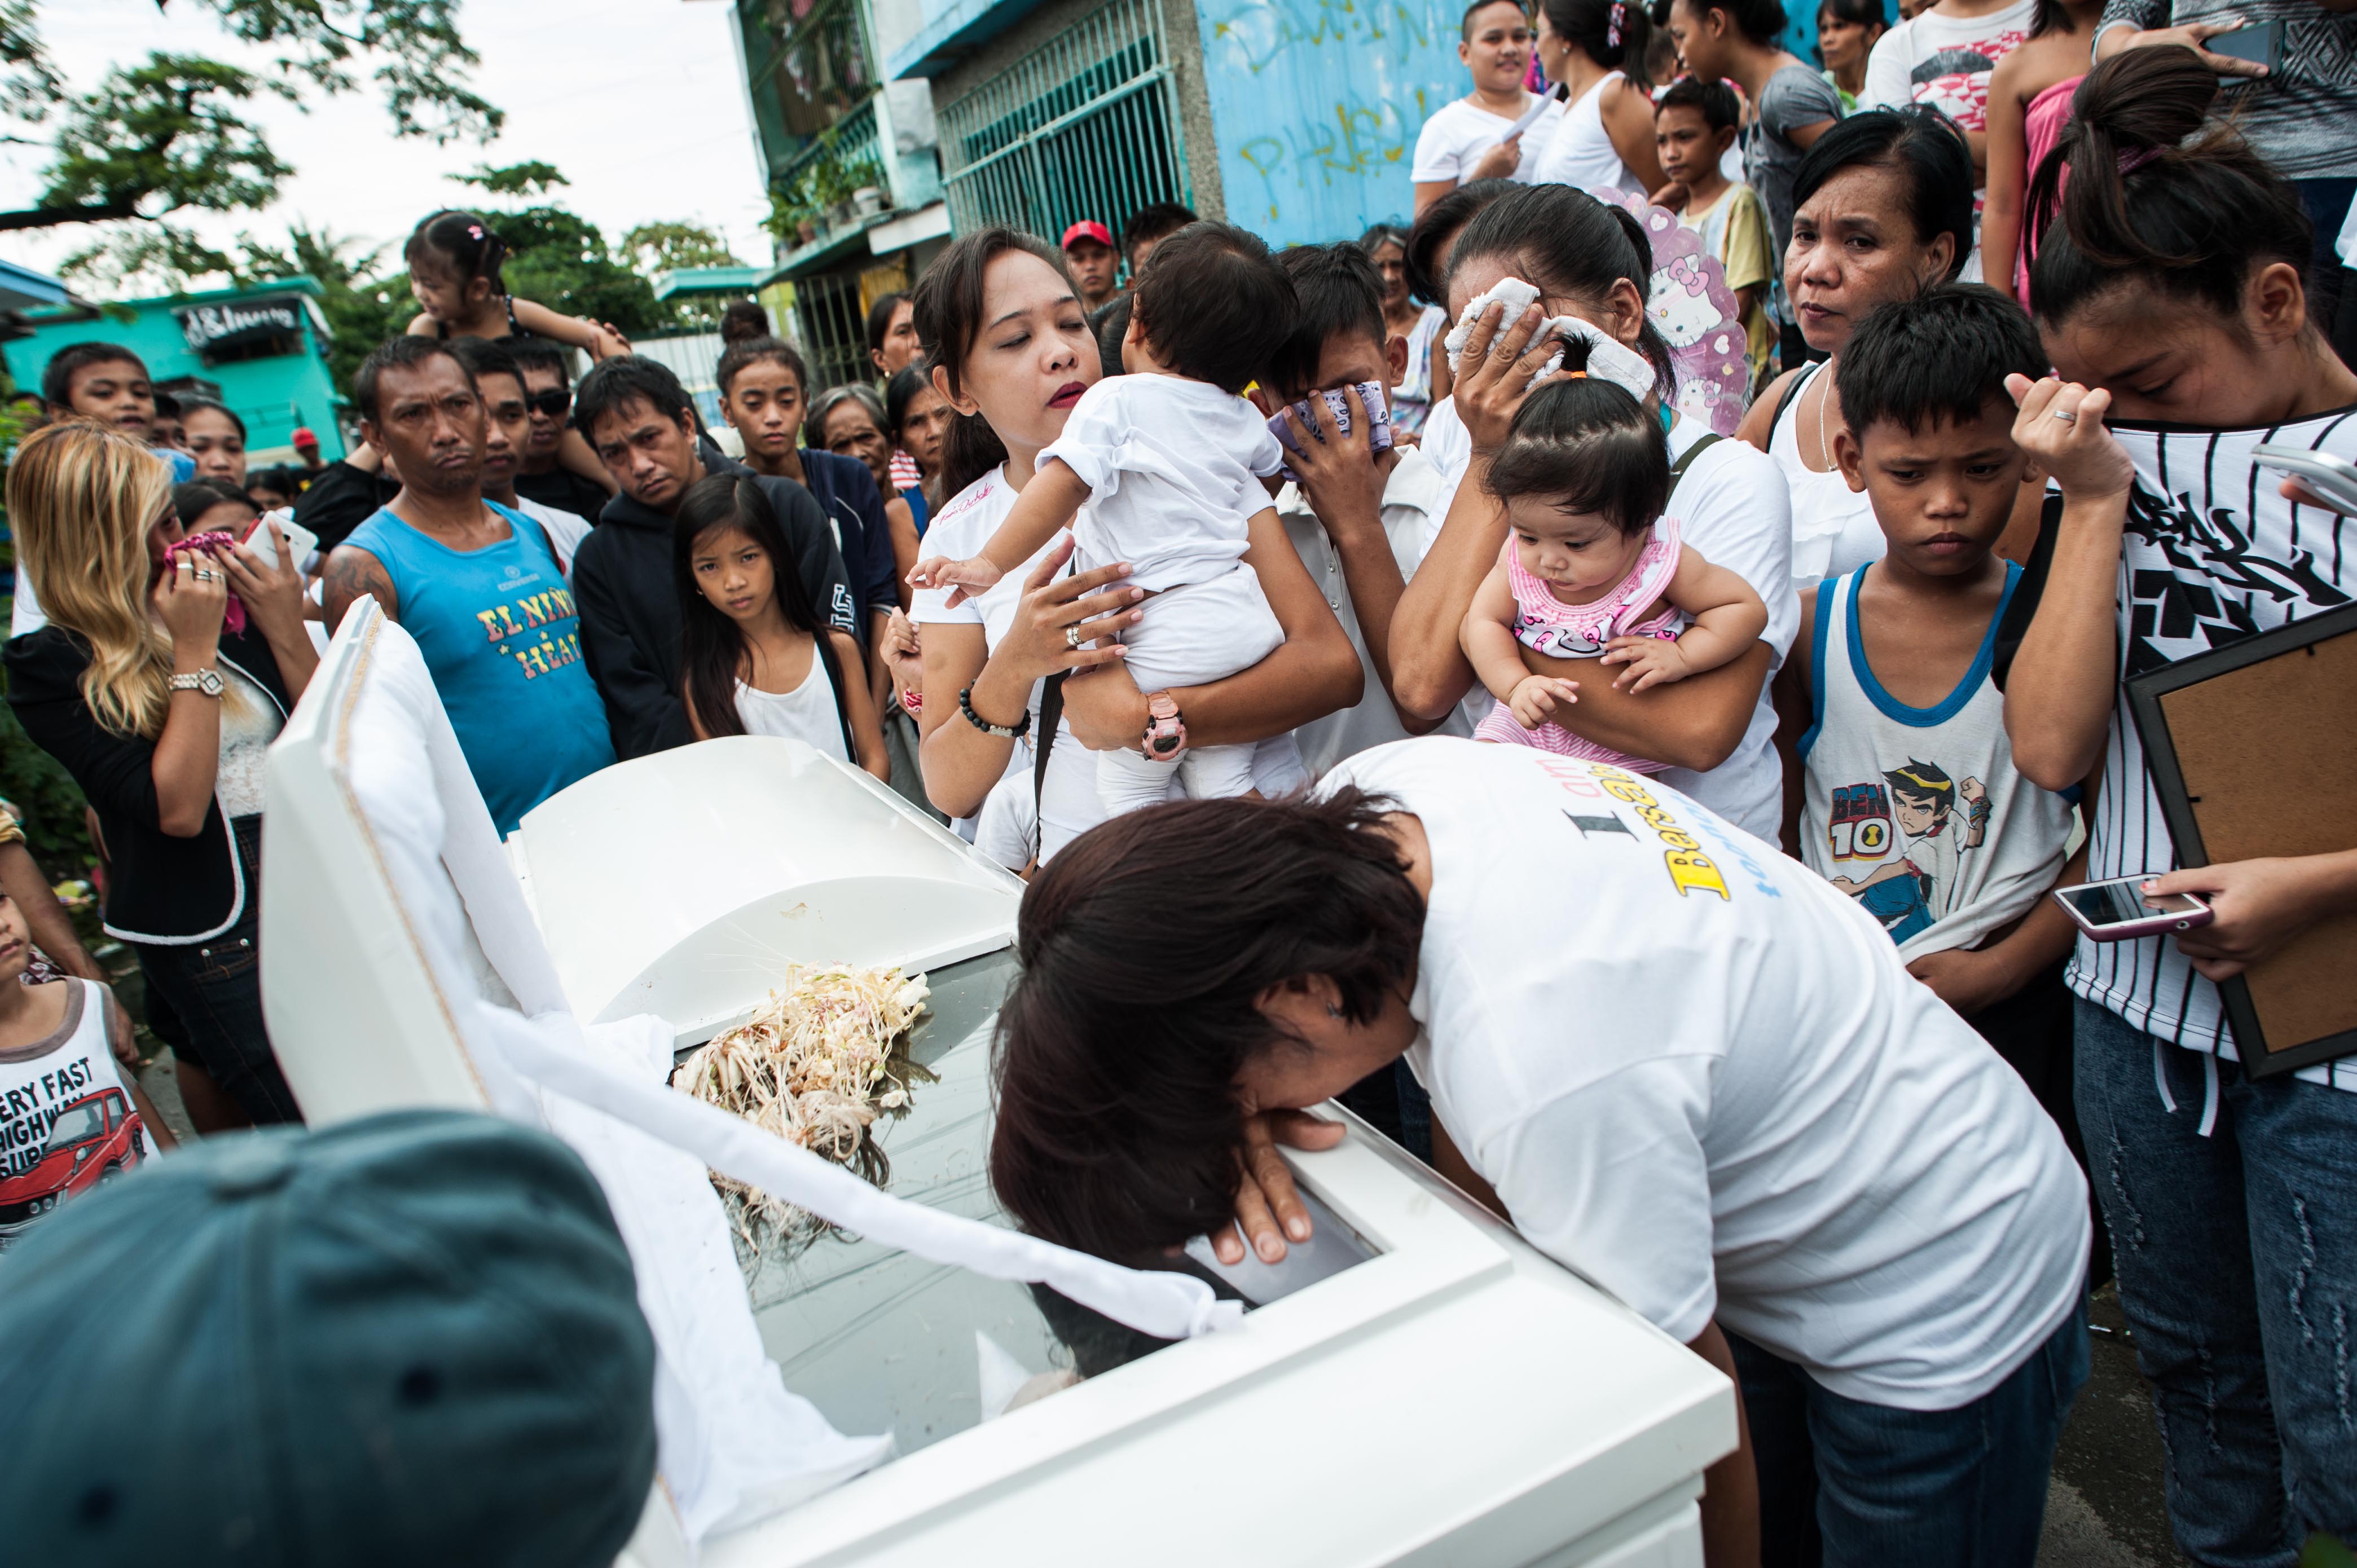 Relatives weep as the coffin of an alleged thief and drug pusher, who was a victim of an extrajudicial killing, is laid to rest on Aug. 21, 2016, in Manila (Dondi Tawatao—Getty Images)